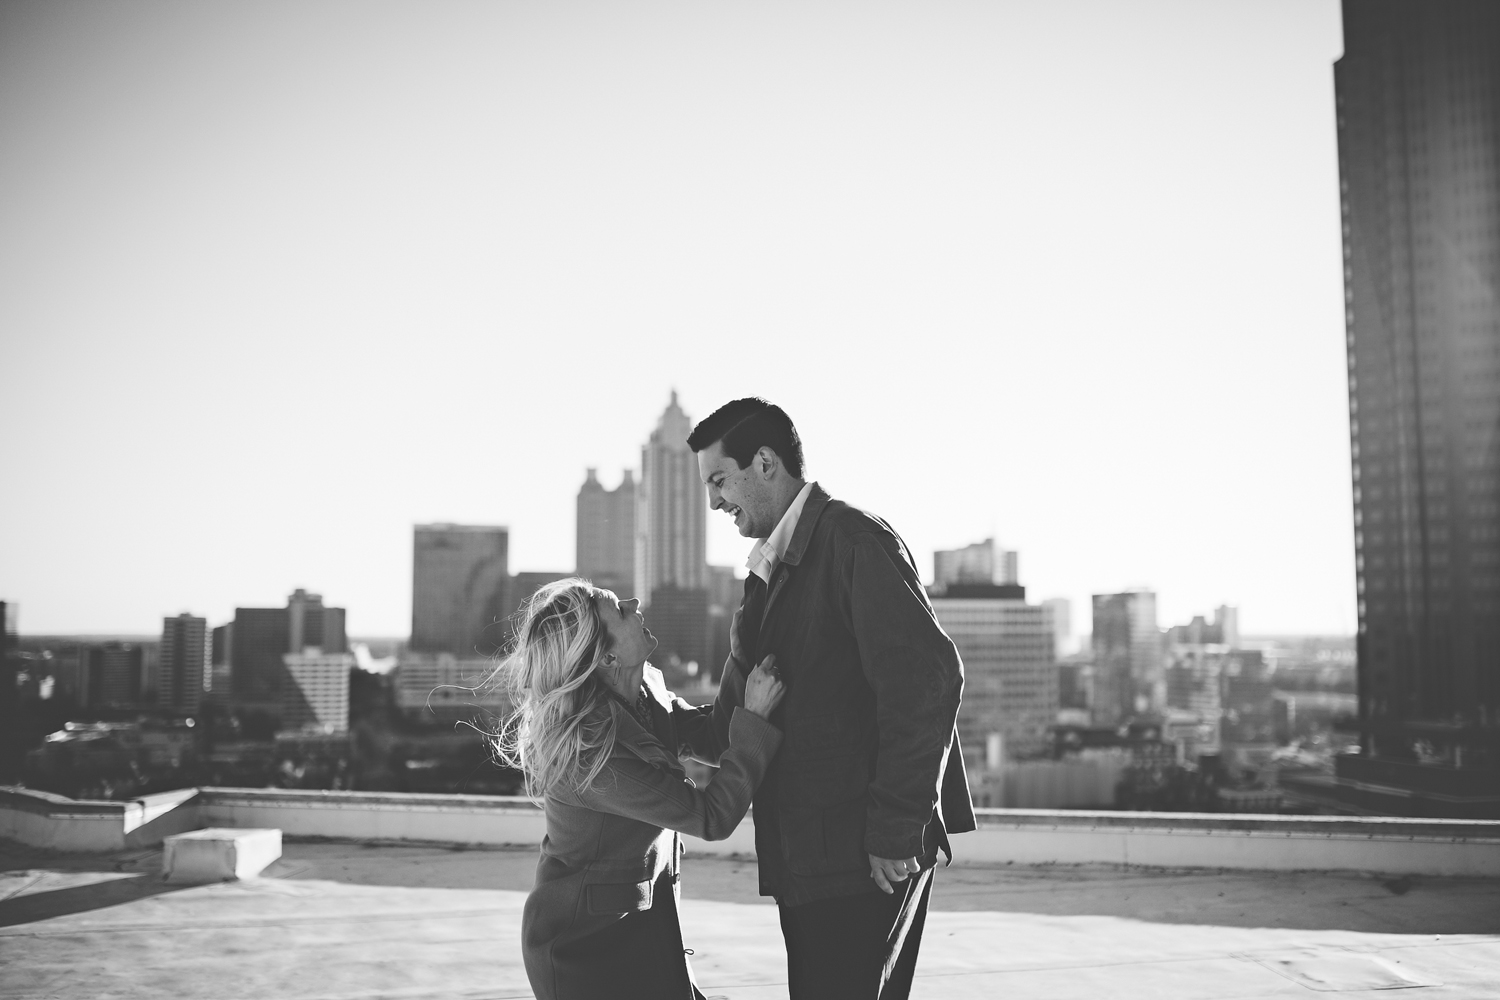 KDP_claire&drew - the proposal-249.jpg